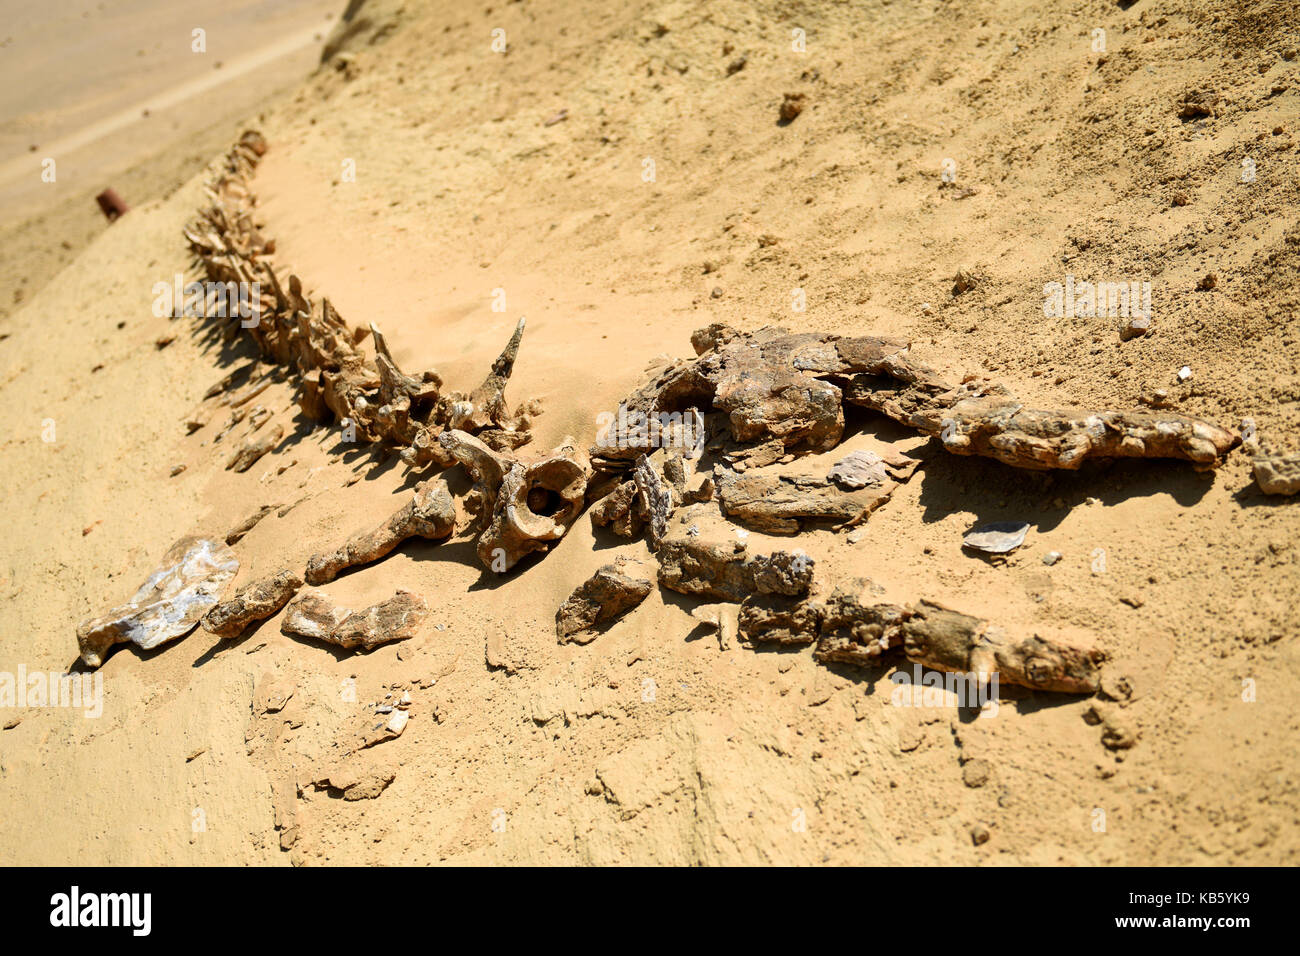 Cairo, Egypt. 27th Sep, 2017. Whale fossils are seen in the natural reserve area of Wadi Al-Hitan, or the Valley of Whales, in Fayoum Governorate, Egypt, on Sept. 27, 2017. Wadi Al-Hitan, or the Valley of Whales, is a paleontological site in the Fayoum Governorate of Egypt. Wadi Al-Hitan contains invaluable fossil remains of the earliest, and now extinct, suborder of whales, Archaeoceti. It was designated a United Nations Educational, Scientific and Cultural Organization (UNESCO) World Heritage Site in 2005. Credit: Zhao Dingzhe/Xinhua/Alamy Live News Stock Photo